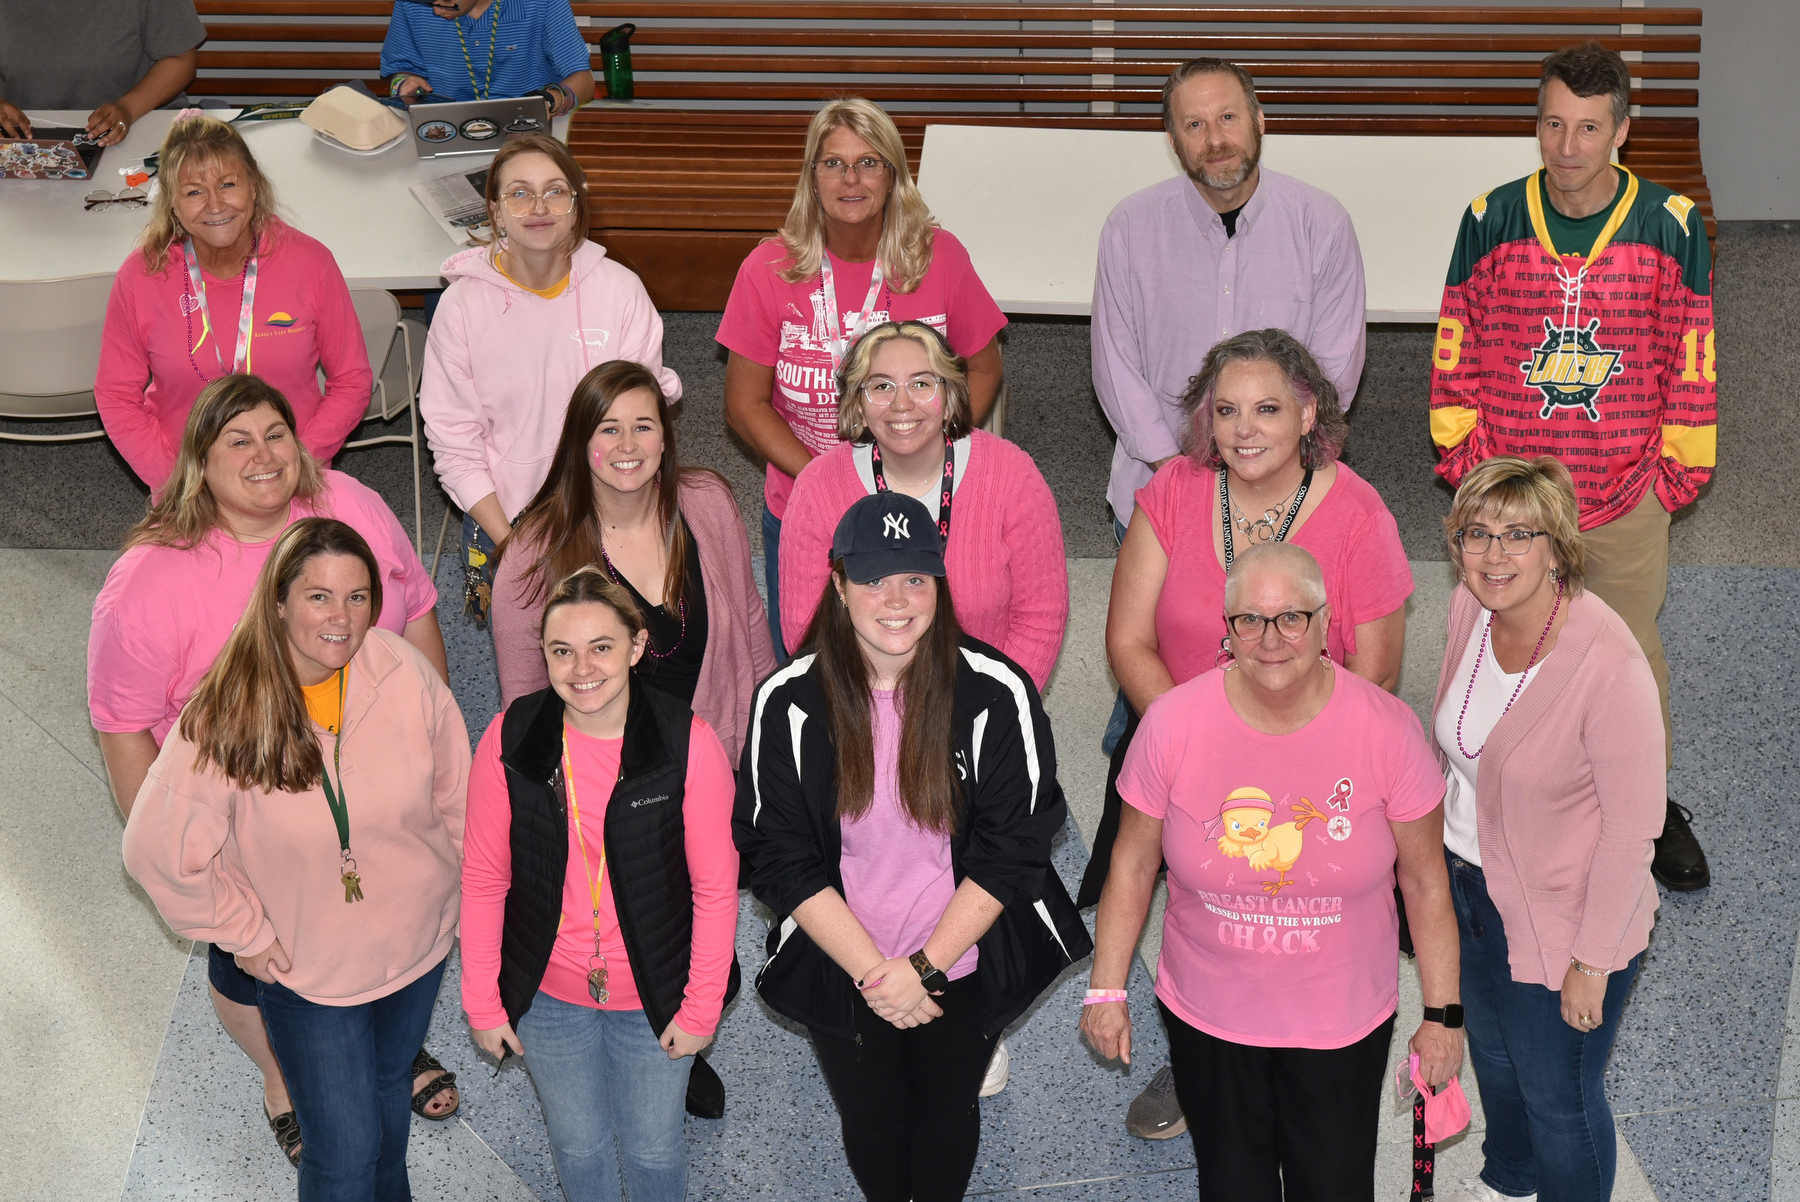 The annual Pink Day, organized by The SEFA Committee to raise funds and awareness about breast cancer, took place on Oct. 27 in Marano Campus Center food and activities court. Participants were invited to wear pink apparel, support various fundraising activities and gather for a group photo. Proceeds from this event remain local and benefit Oswego County Opportunities Cancer Services.